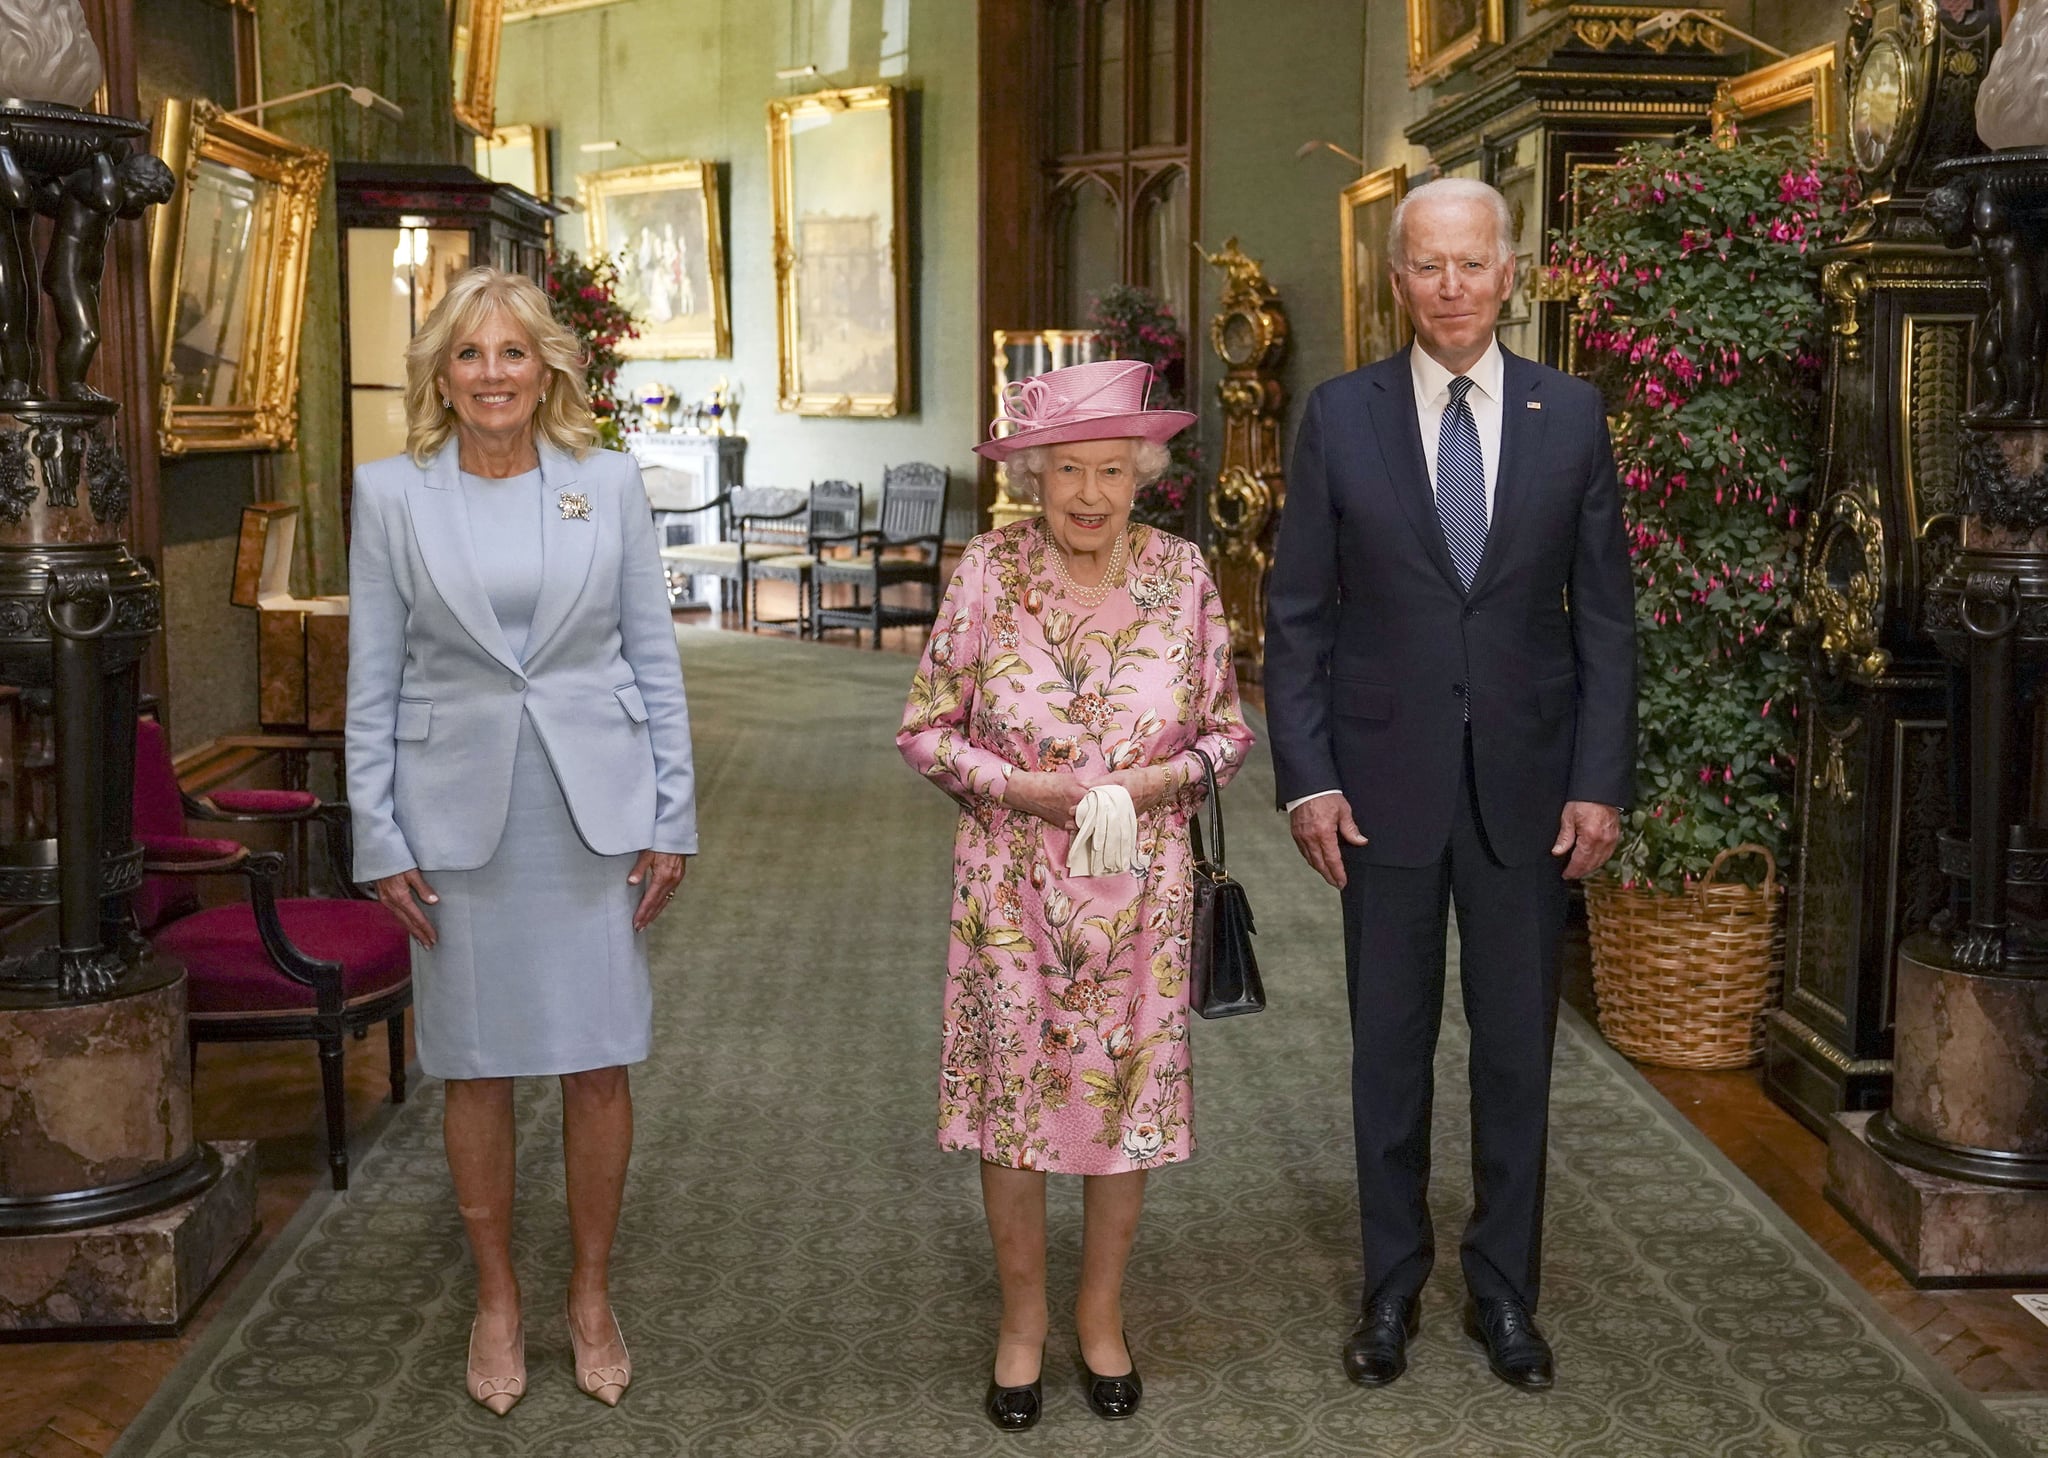 WINDSOR, ENGLAND - JUNE 13: Queen Elizabeth II (C) with US President Joe Biden and First Lady Jill Biden in the Grand Corridor during their visit to Windsor Castle on June 13, 2021 in Windsor, England. Queen Elizabeth II hosts US President, Joe Biden and First Lady Dr Jill Biden at Windsor Castle. The President arrived from Cornwall where he attended the G7 Leader's Summit and will travel on to Brussels for a meeting of NATO Allies and later in the week he will meet President of Russia, Vladimir Putin. (Photo by Steve Parsons - WPA Pool/Getty Images)